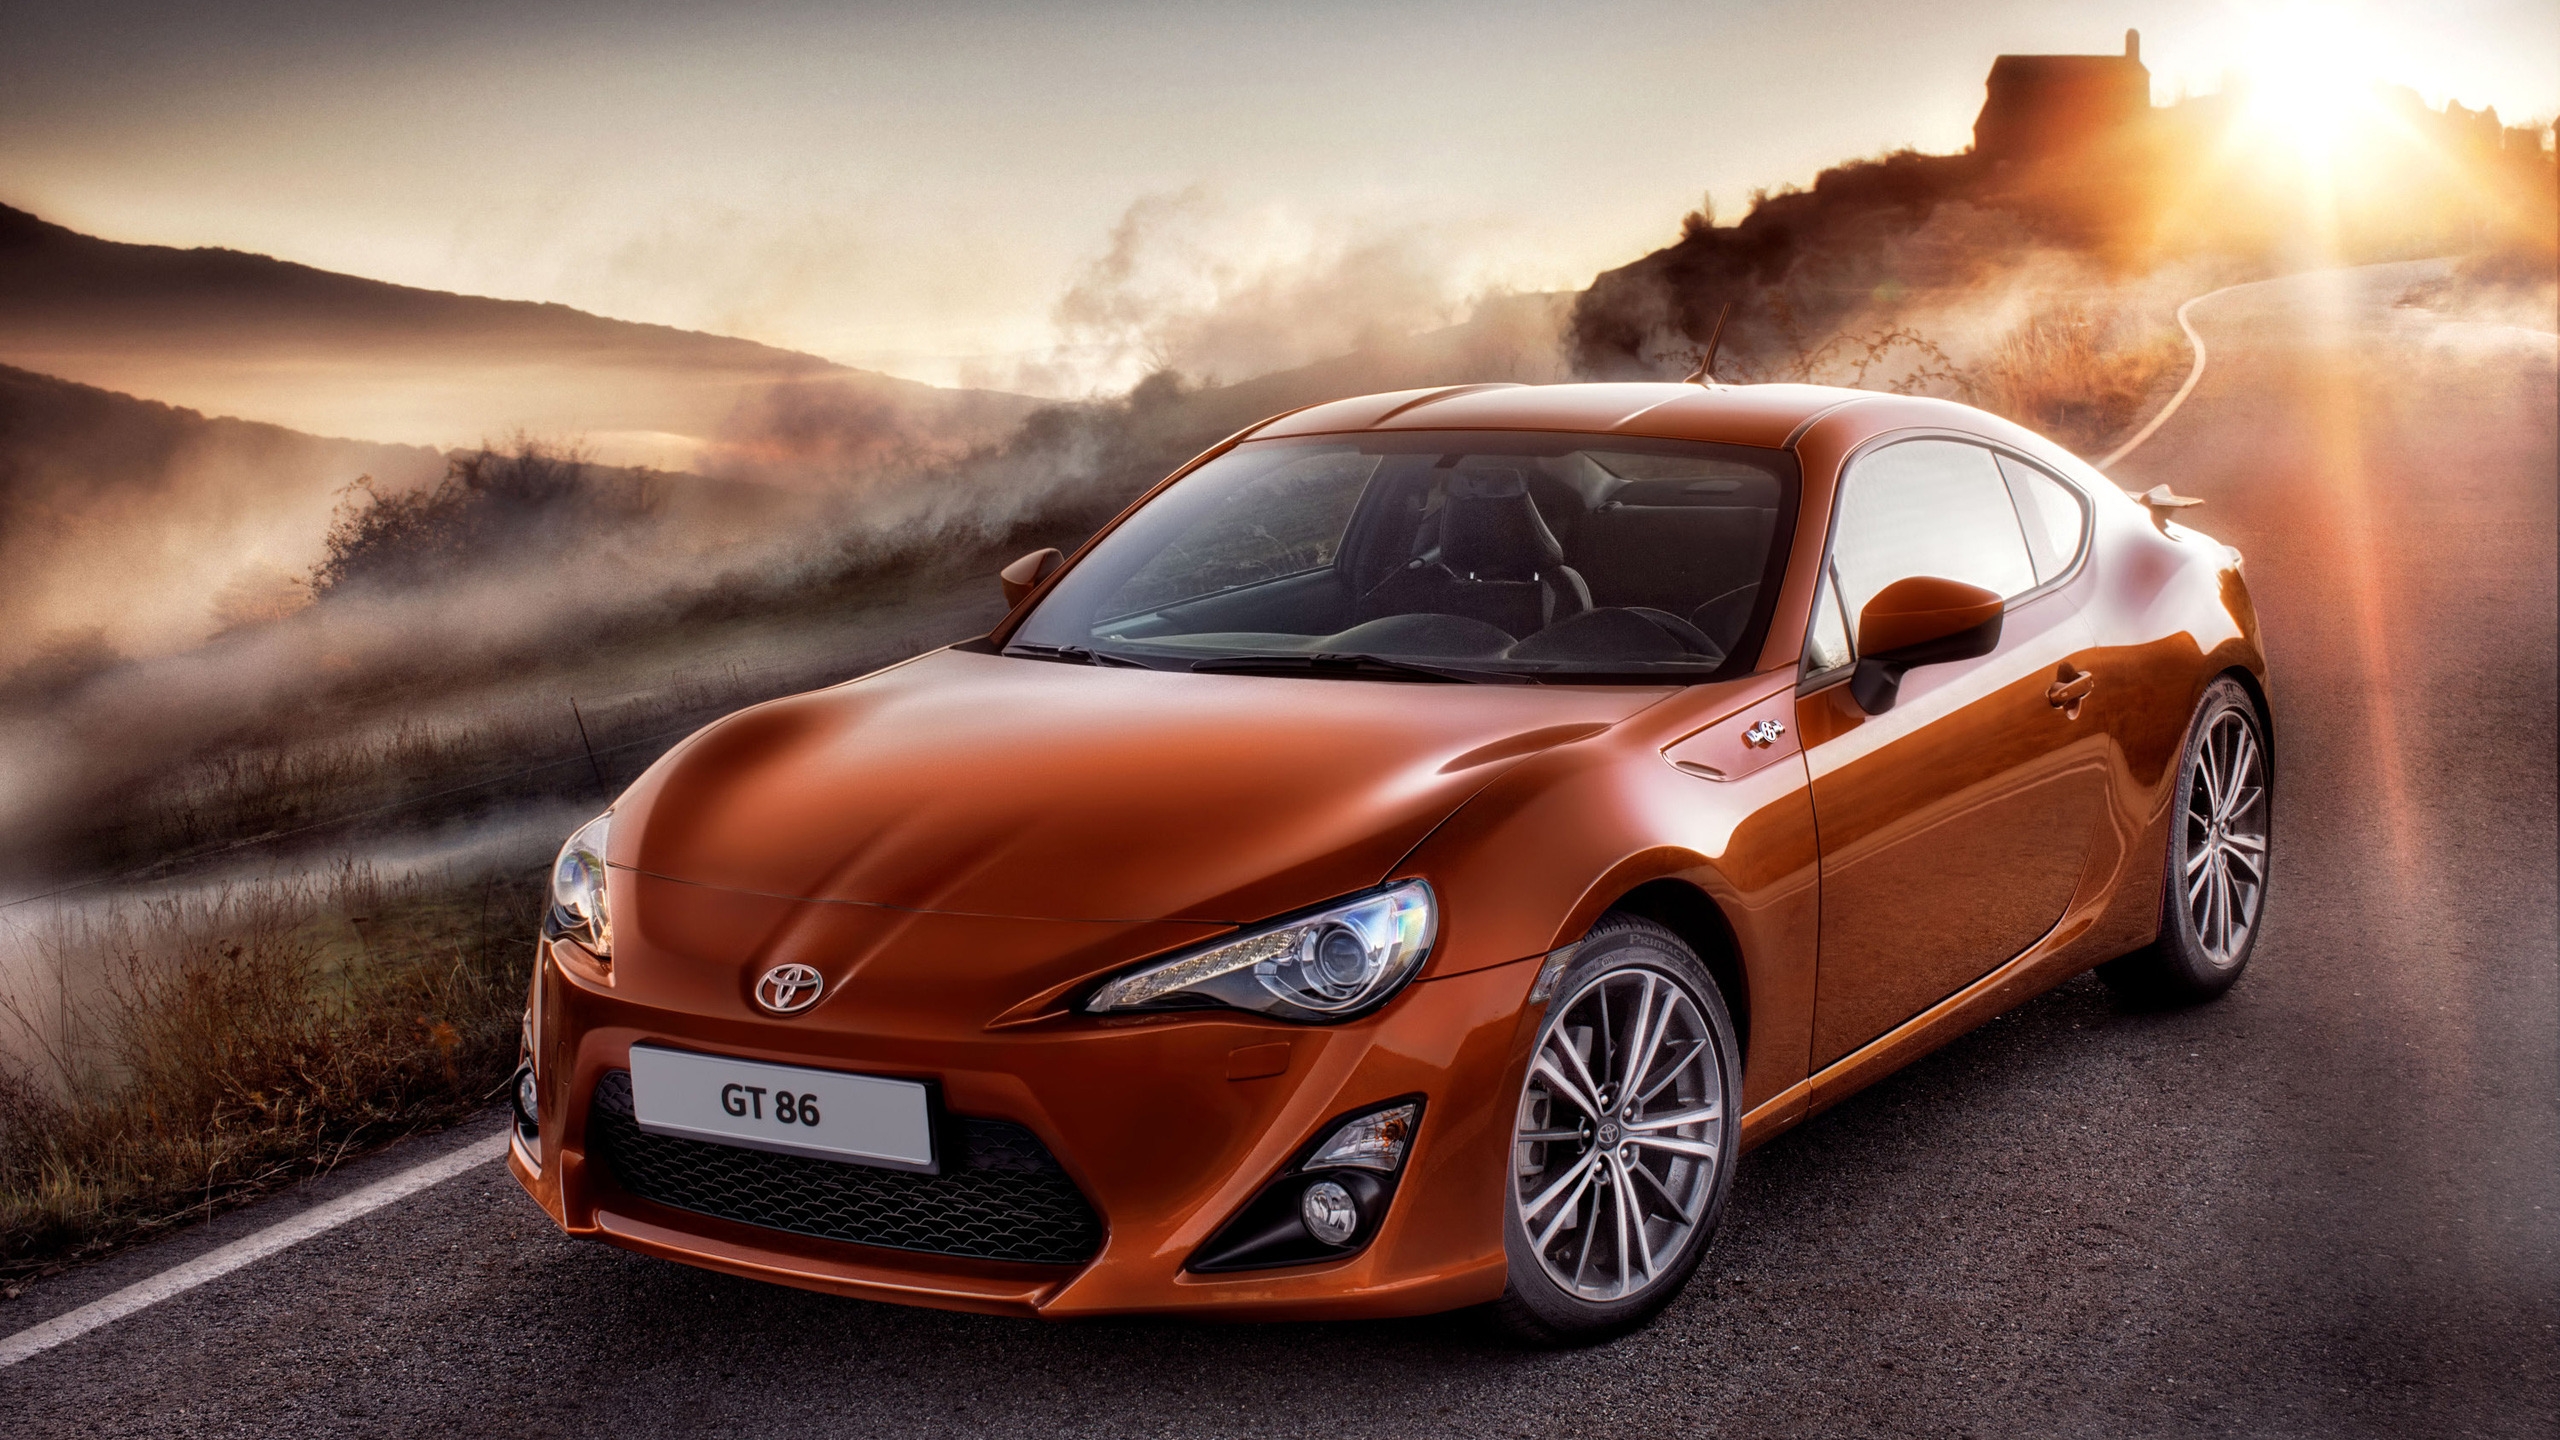 Amazing Toyota GT 86 for 2560x1440 HDTV resolution